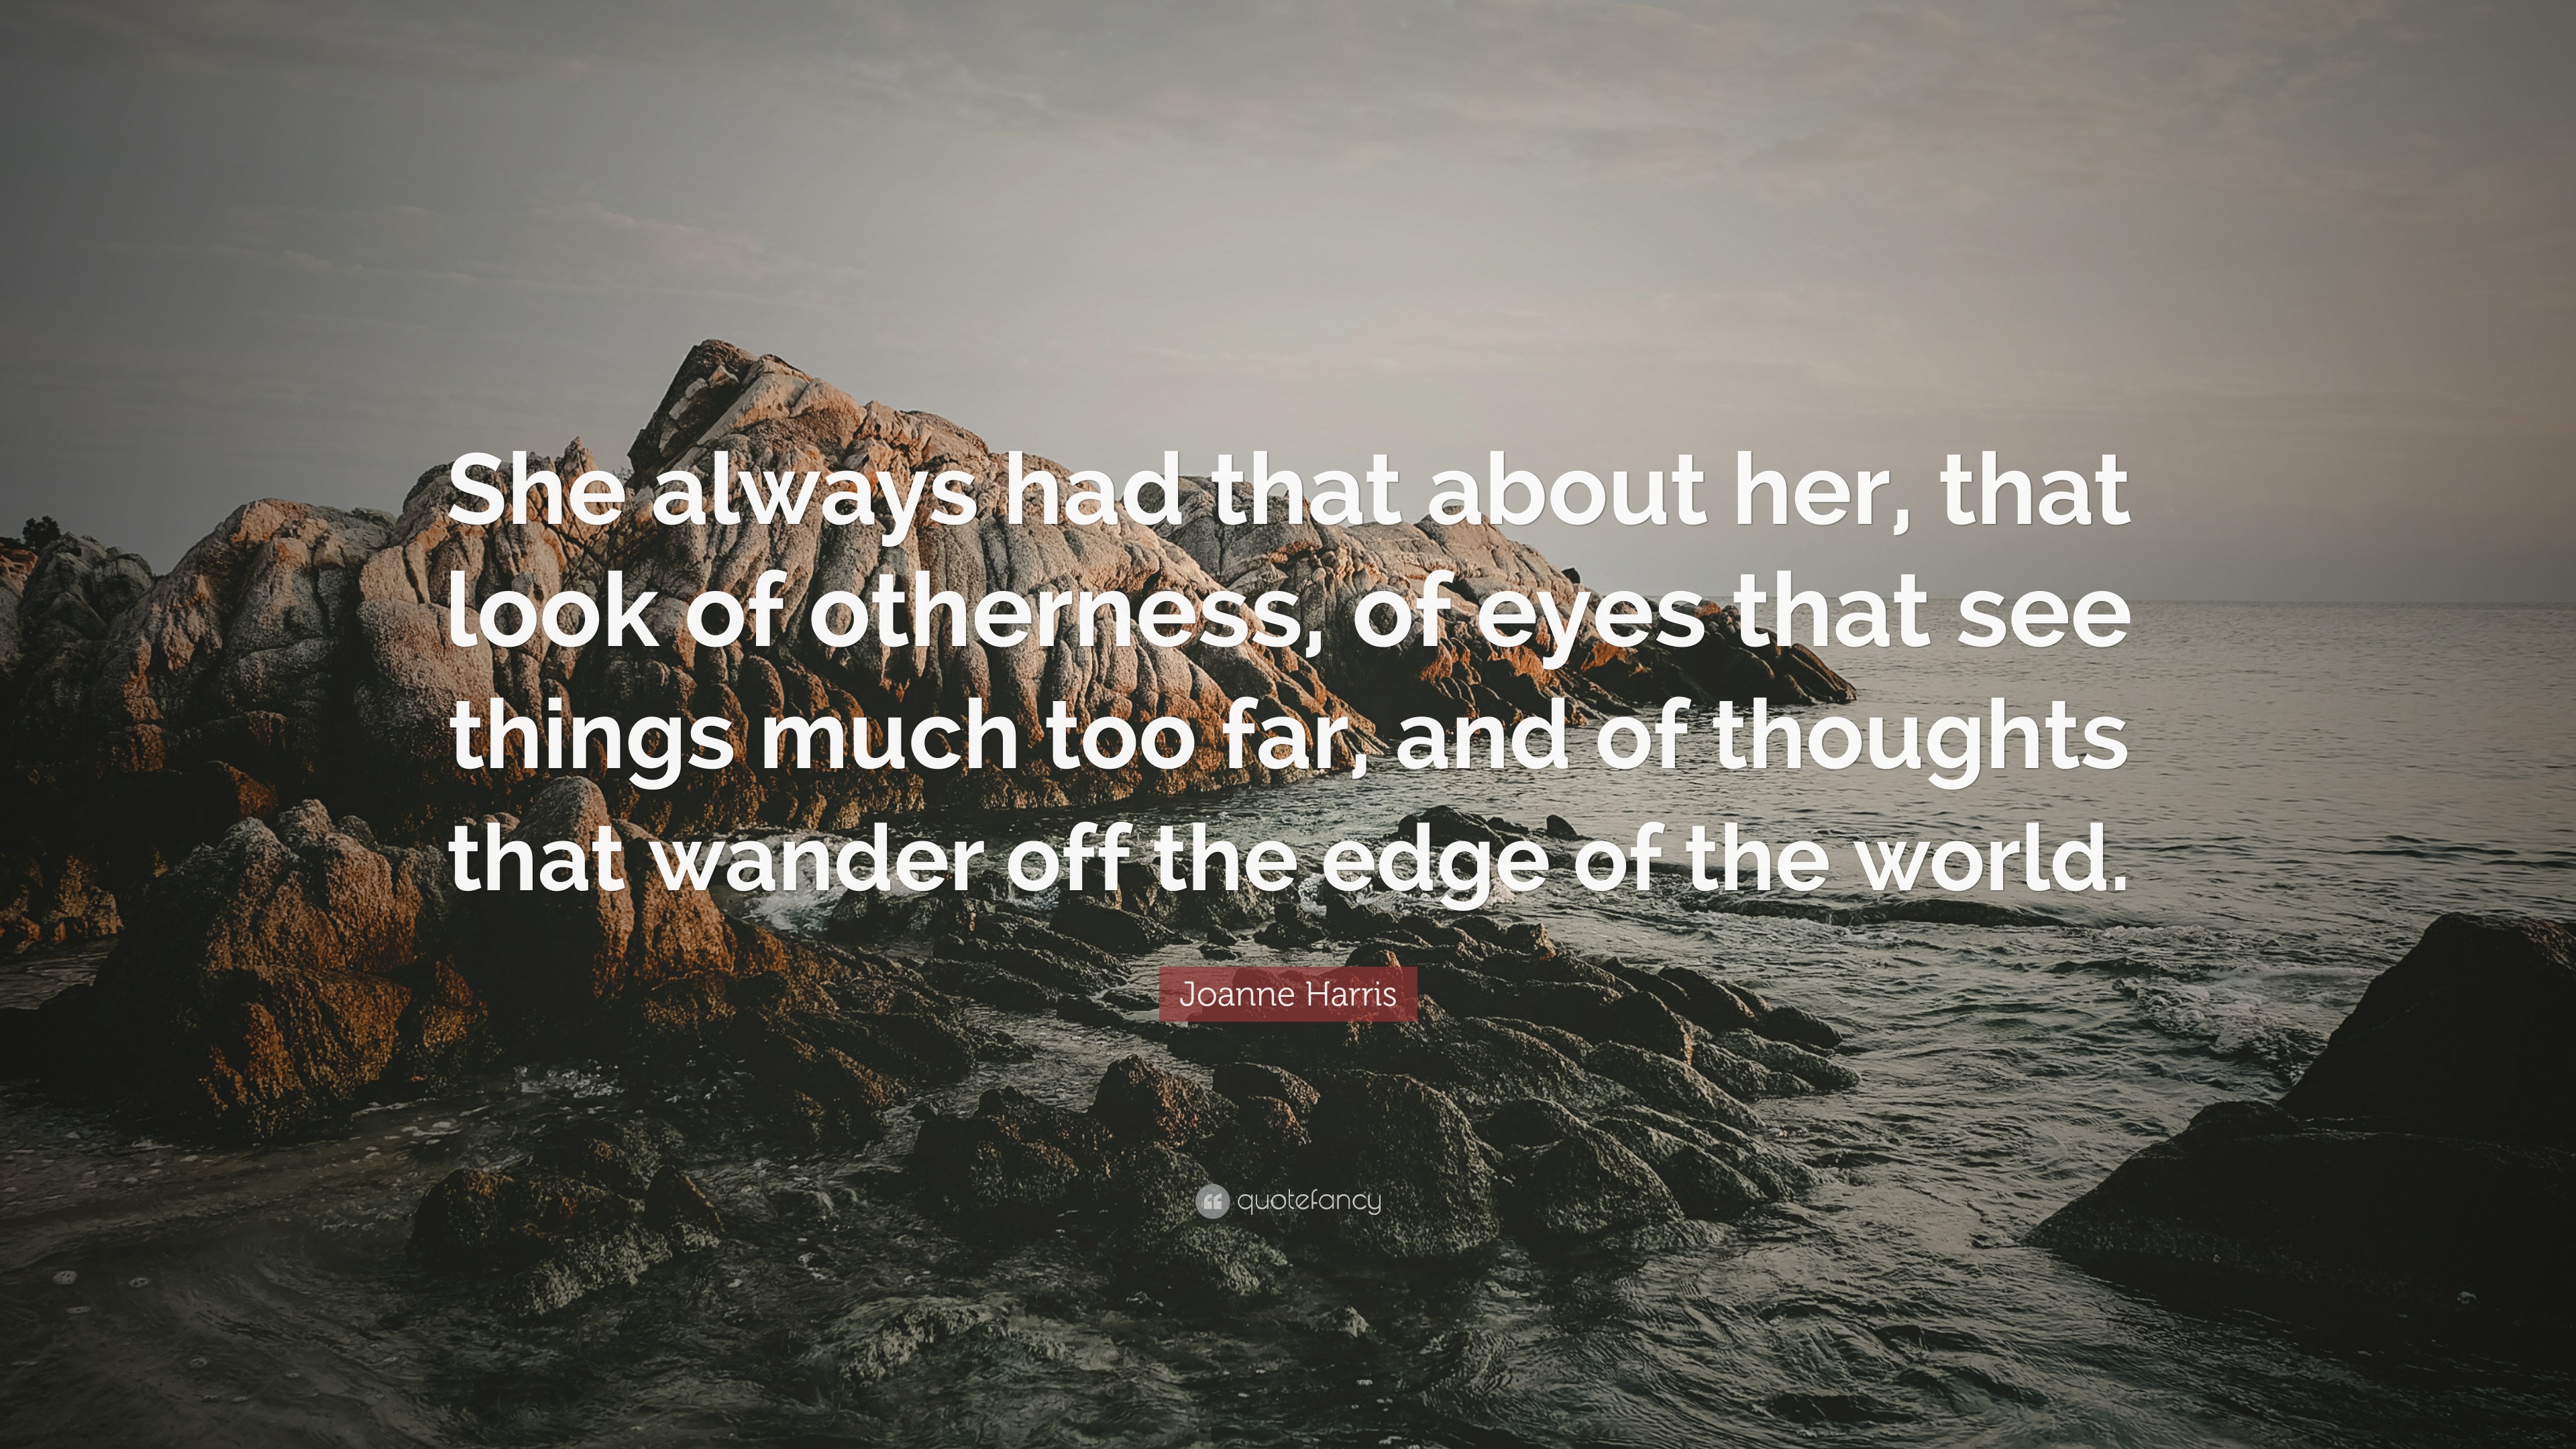 Joanne Harris Quote: “She always had that about her, that look of ...